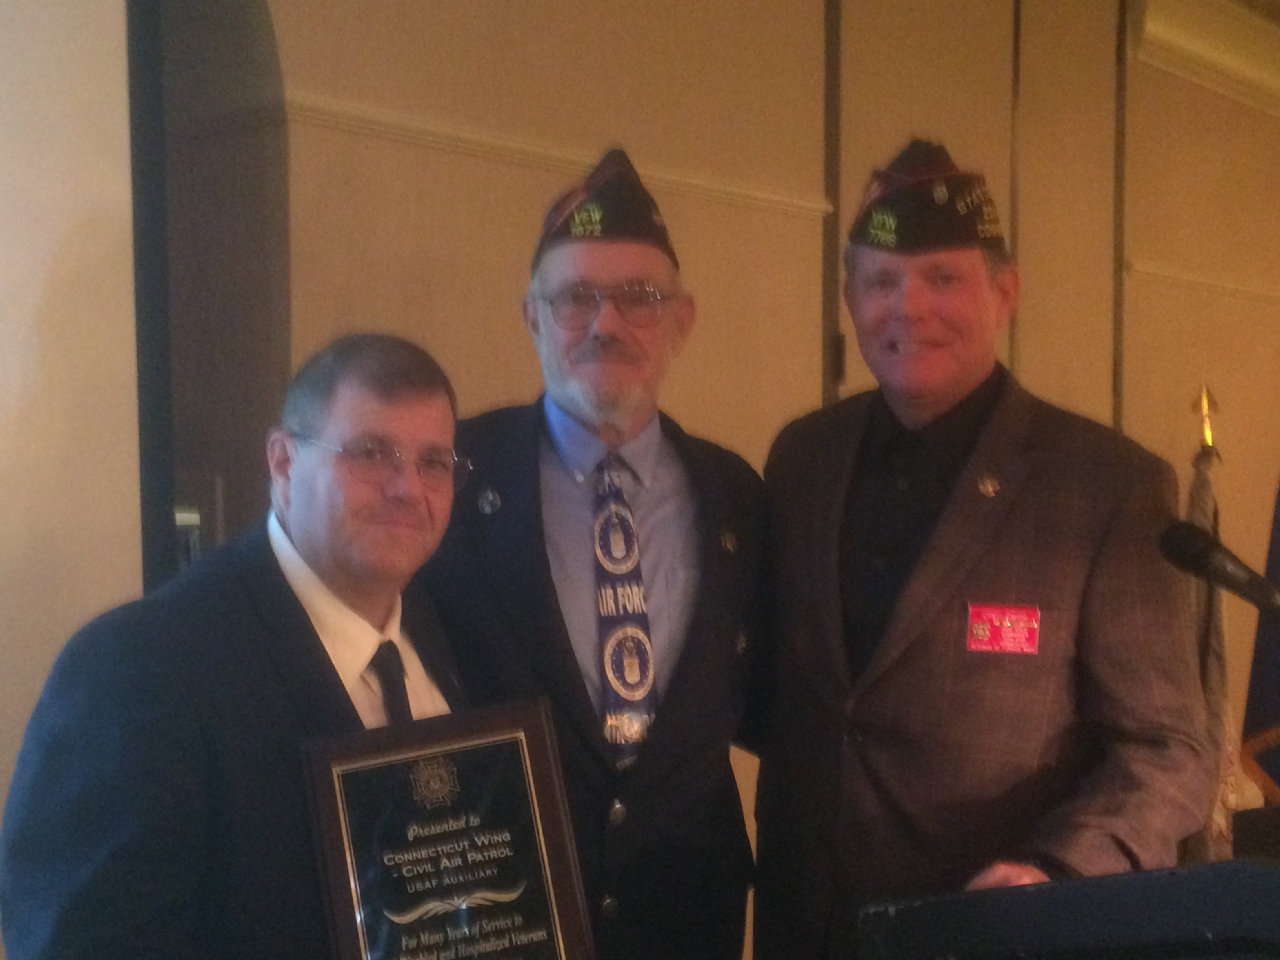 Honored to join VFW State Commander Jim Delancy in presenting an award for service to Colonel James Ridley and the Connecticut Civil Air Patrol and Air Force Cadet programs.